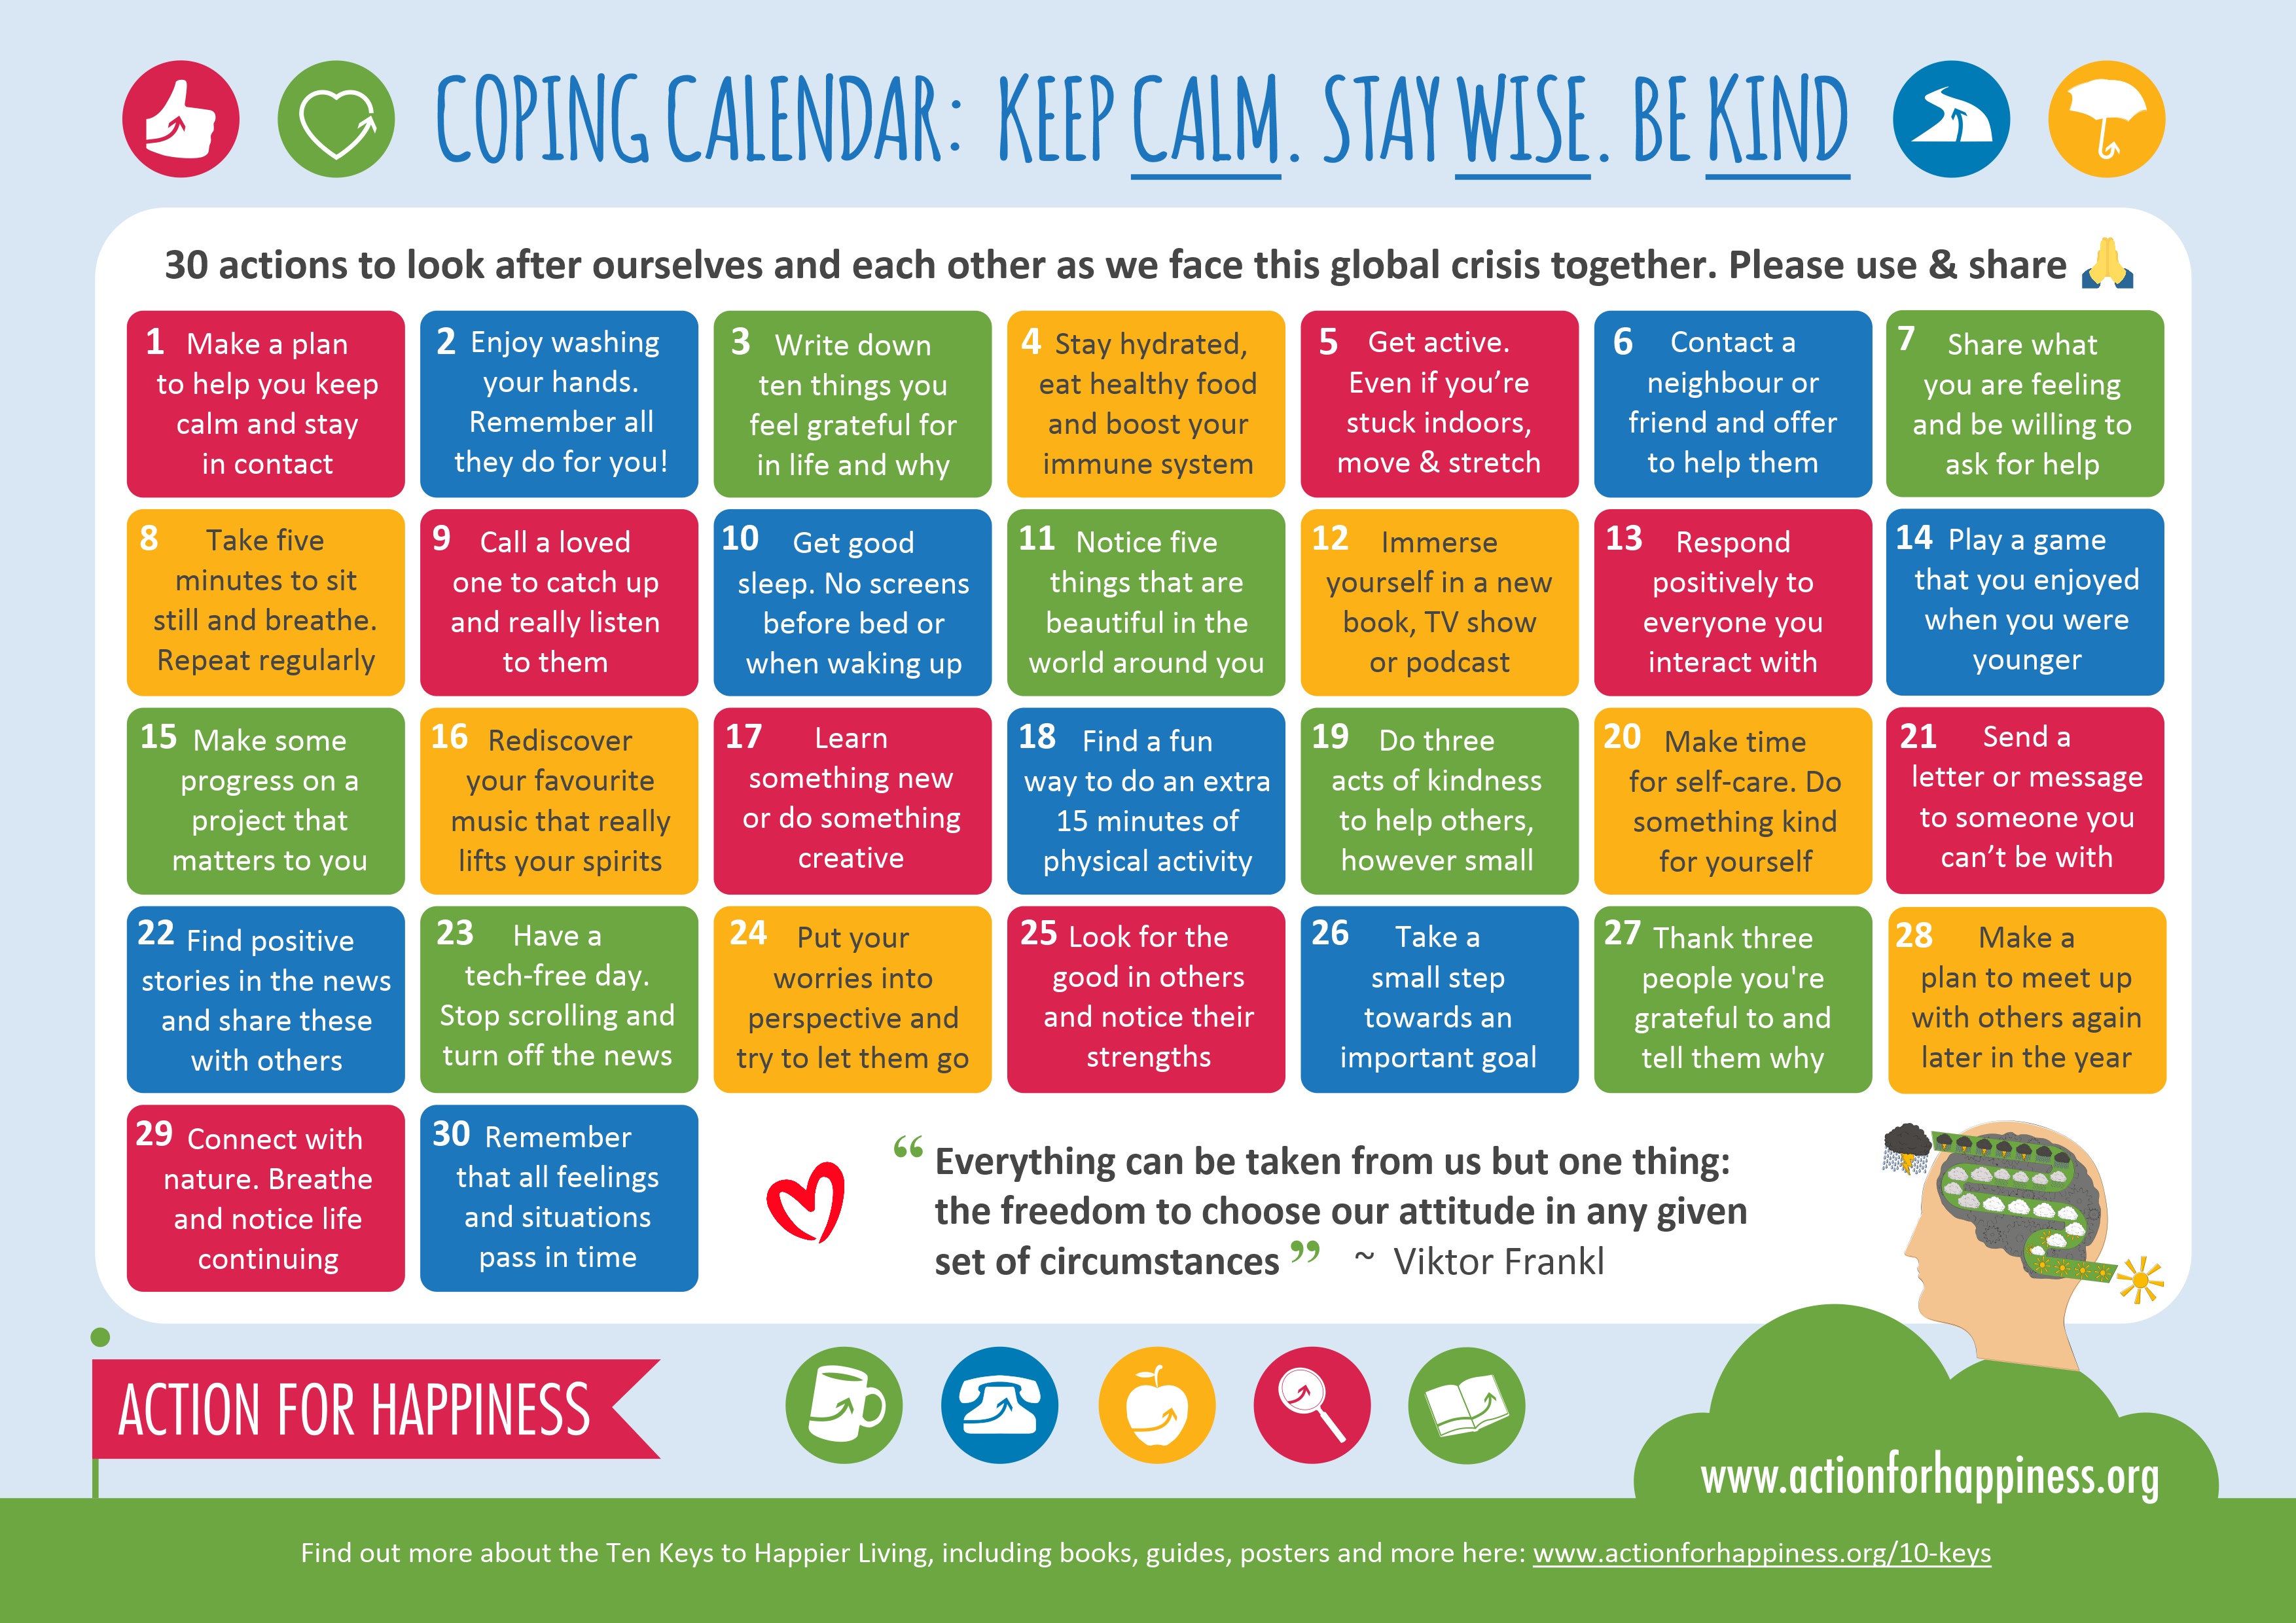 Image shows a Coping Calendar with 30 ideas on self care, by Action for Happiness.